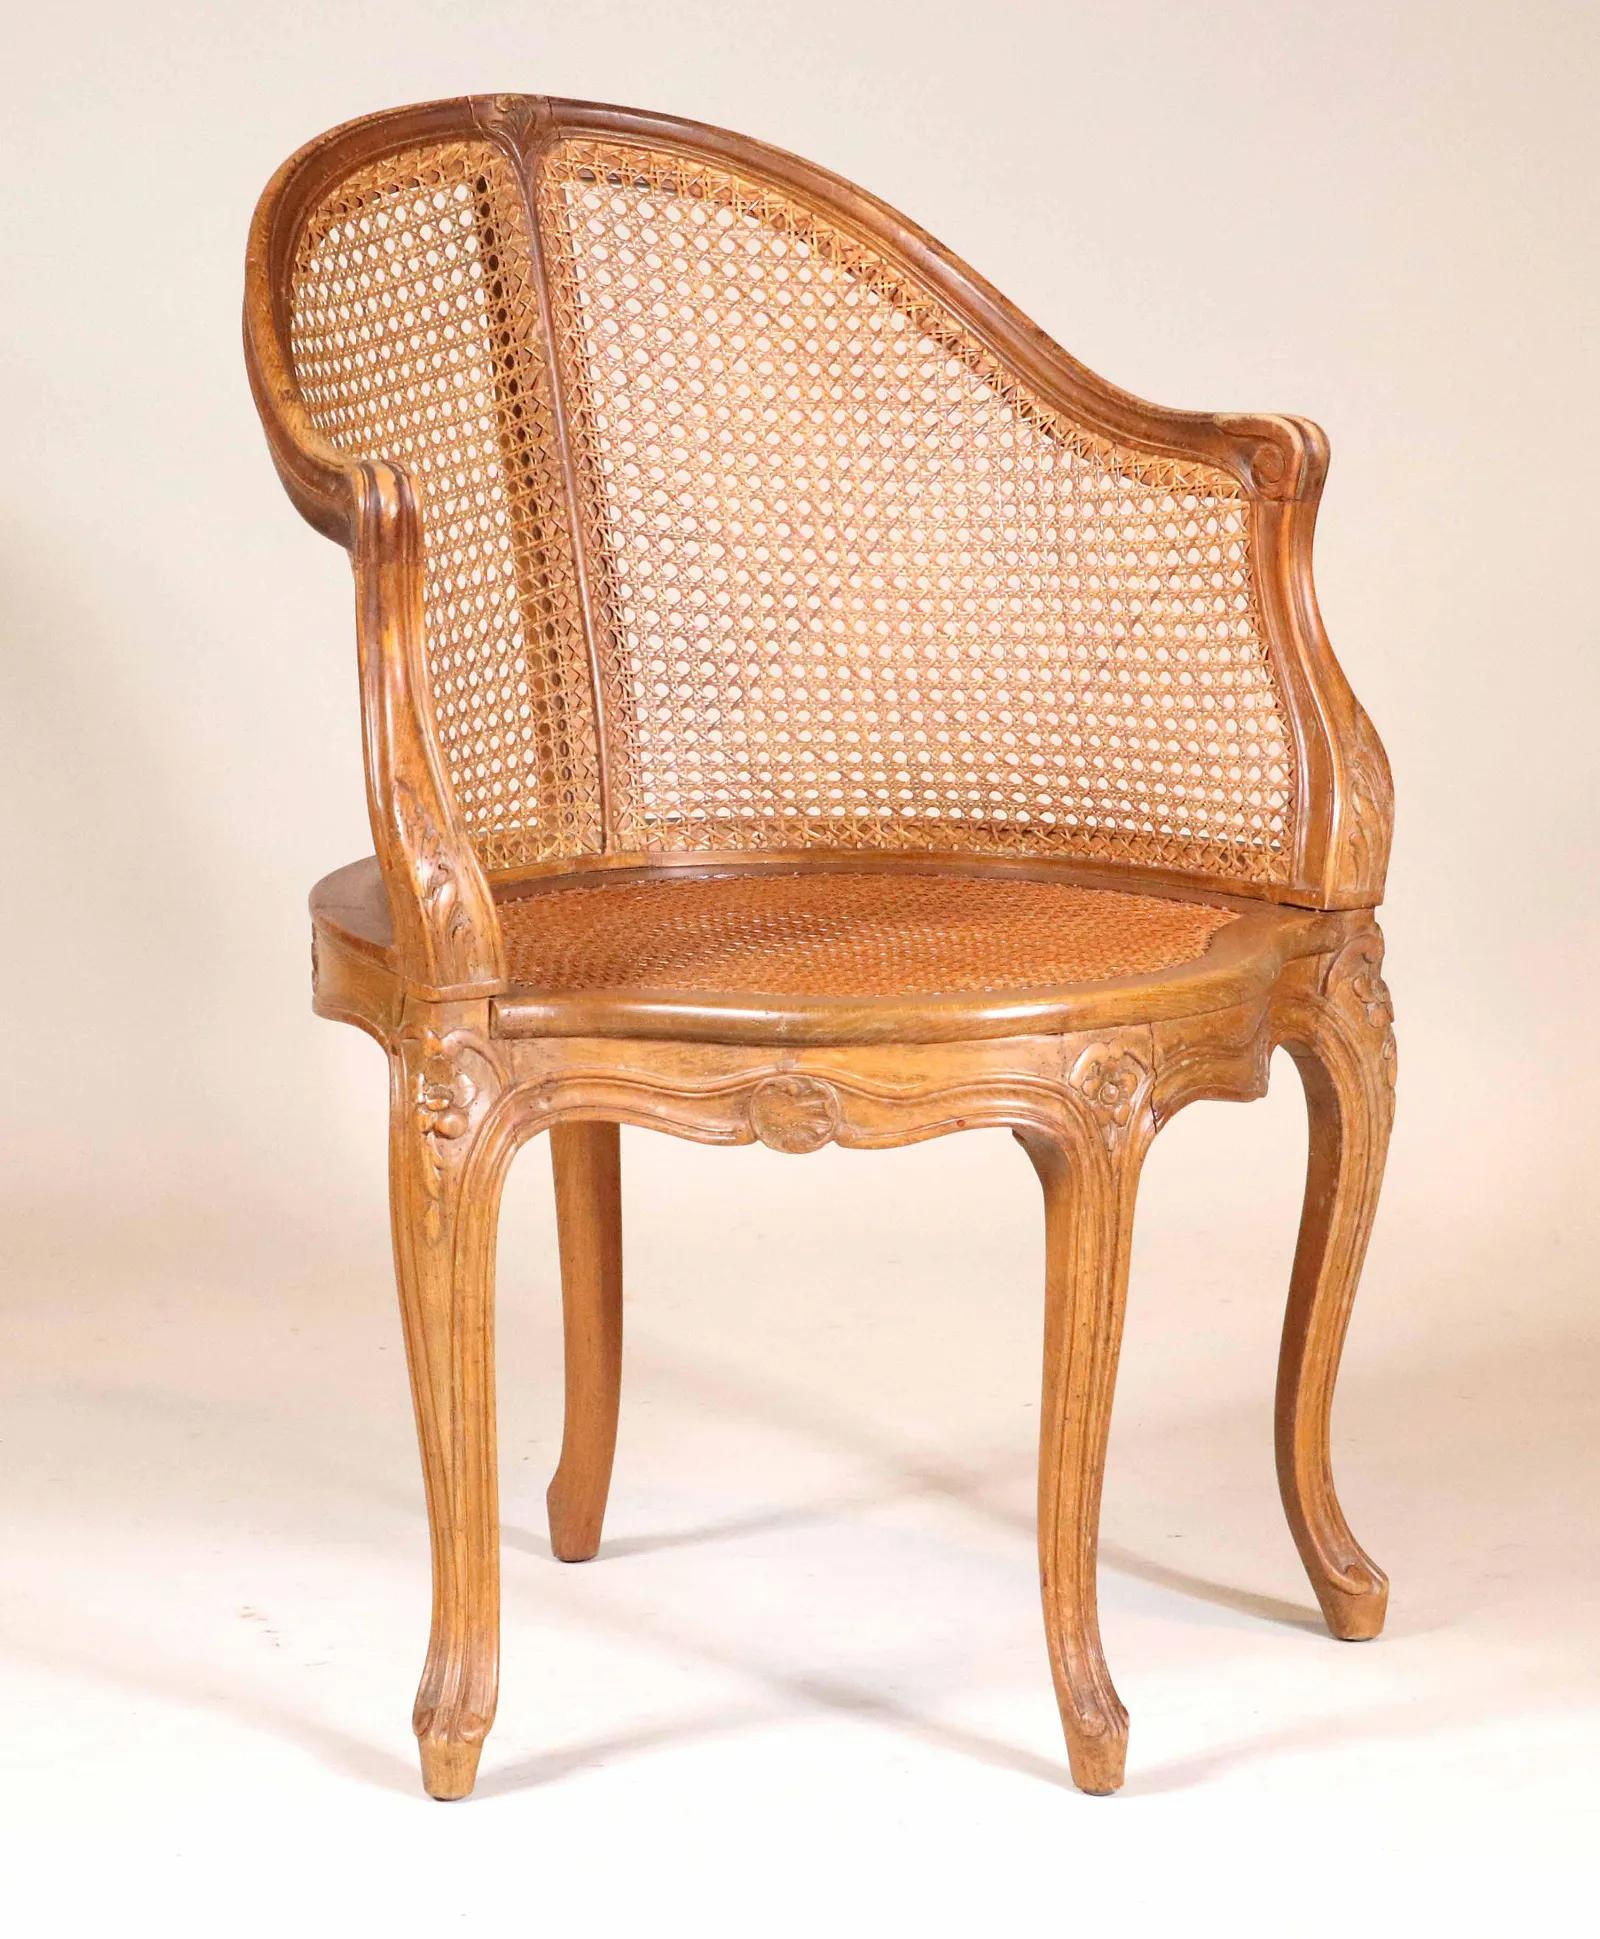 A Louis XV style fauteuil de bureau (desk chair) in carved beechwood with caned seat and back. Cabriole legs, scalloped apron, nicely carved decoration on back rail.